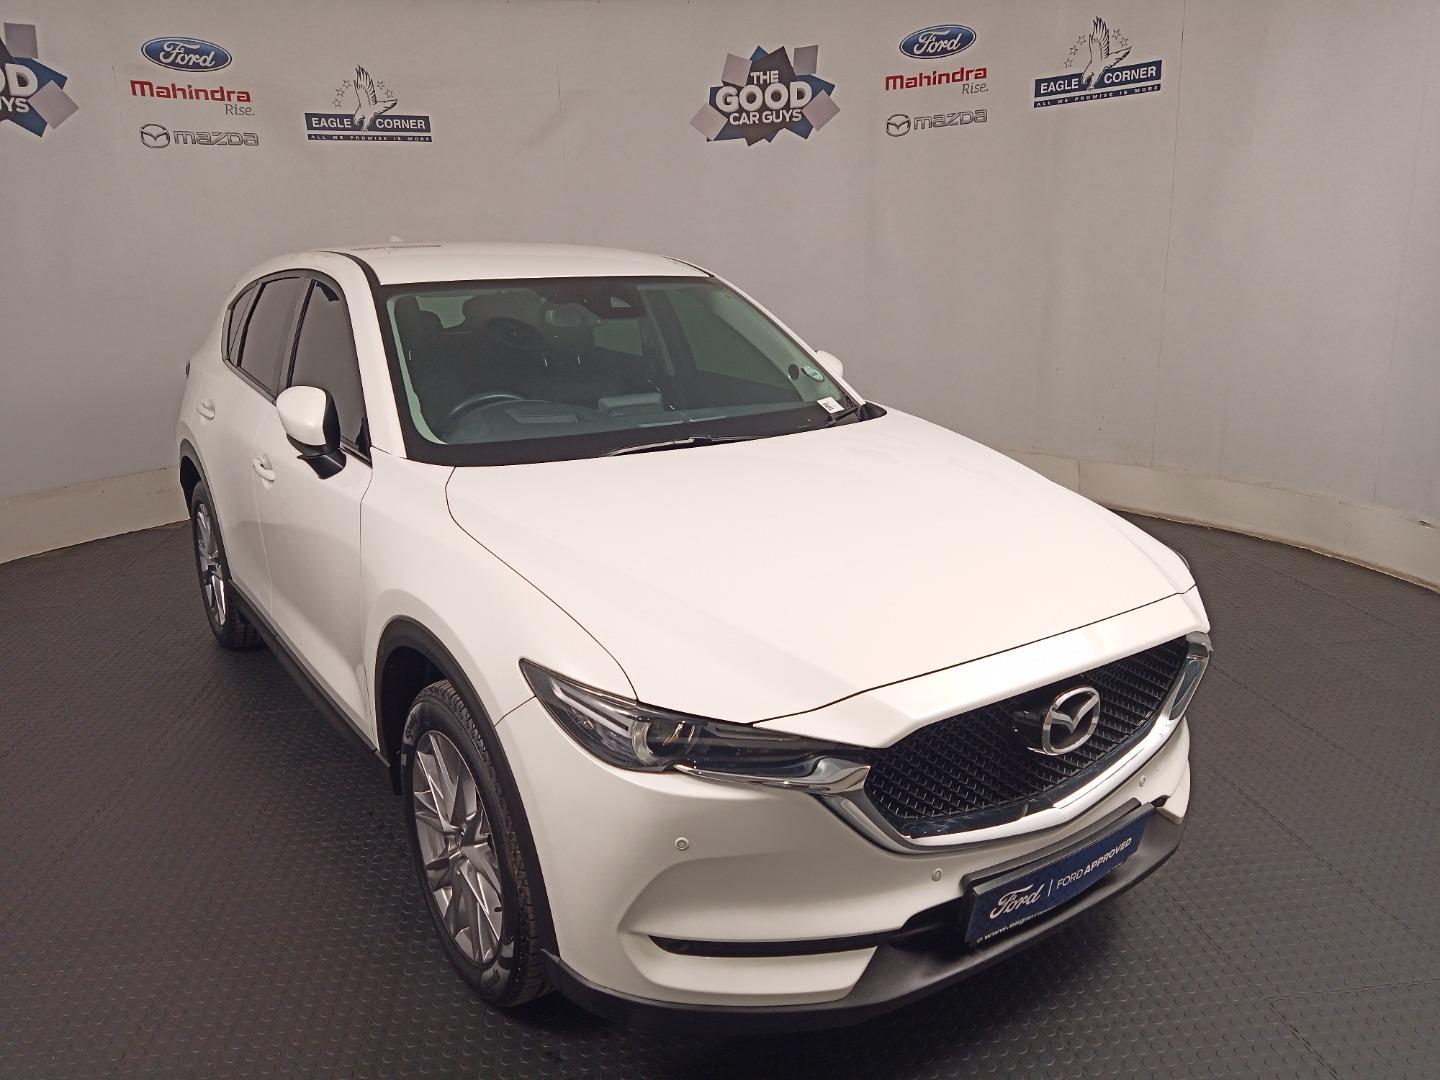 2020 MAZDA CX-5 2.0 INDIVidUAL AT  for sale - EC167|DF|10USE13499